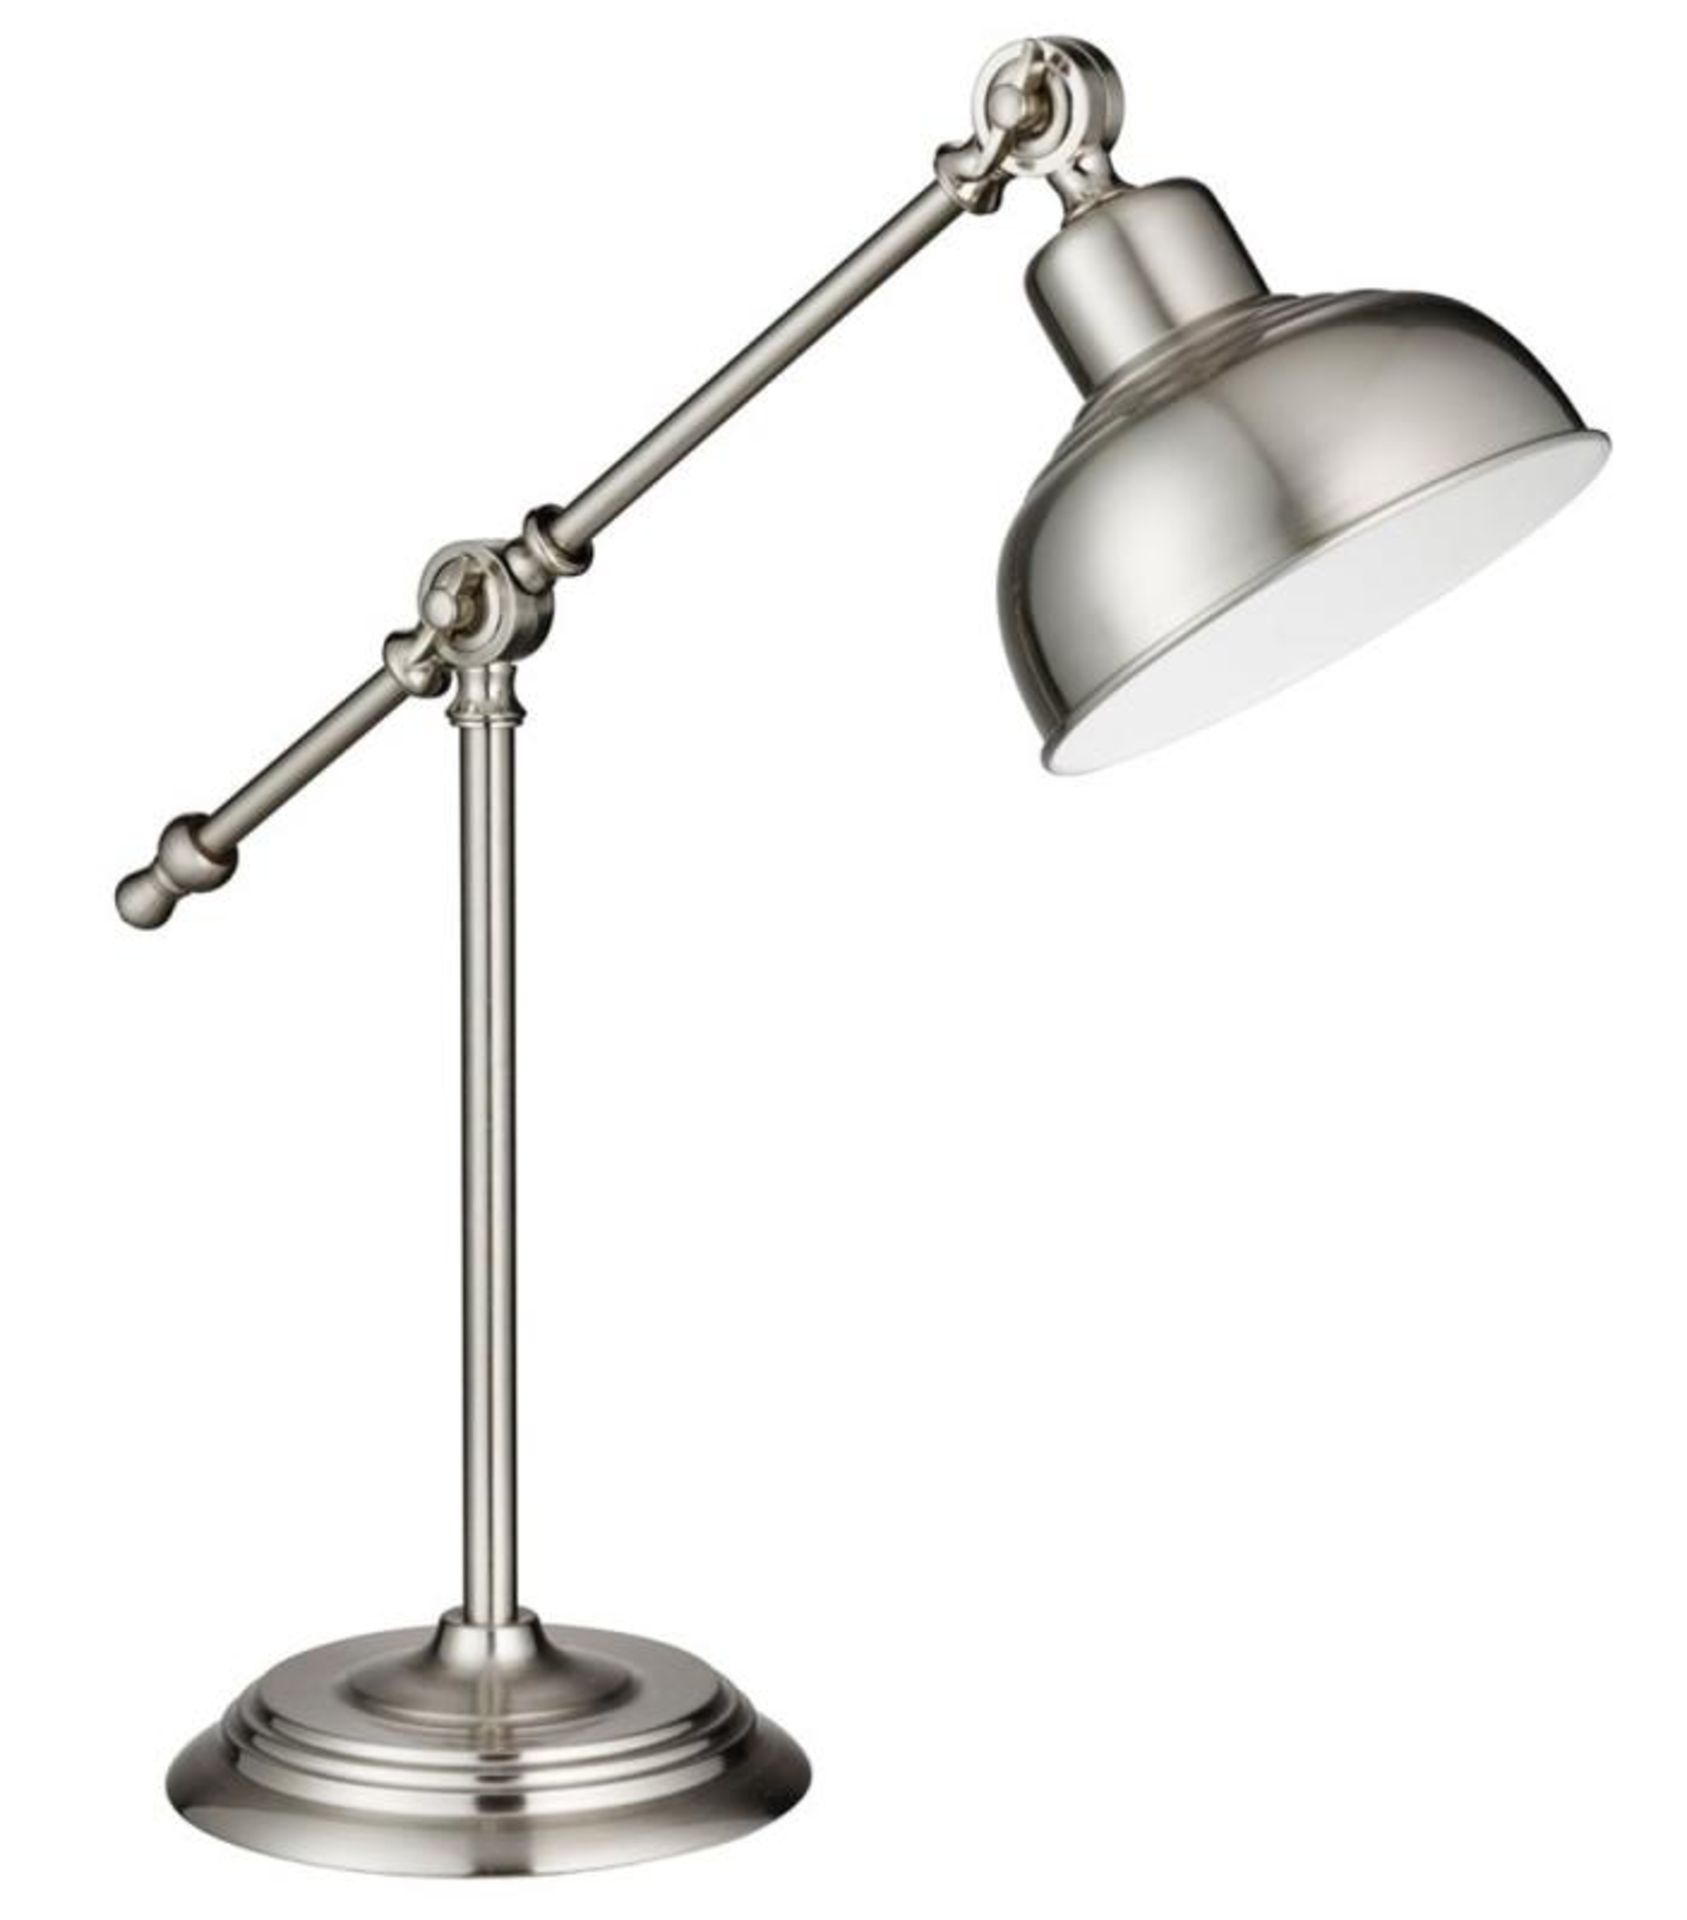 1 x Macbeth Industrial Style 1-Light Table Lamp In Satin Silver - New Boxed Stock - CL323 - Ref: 201